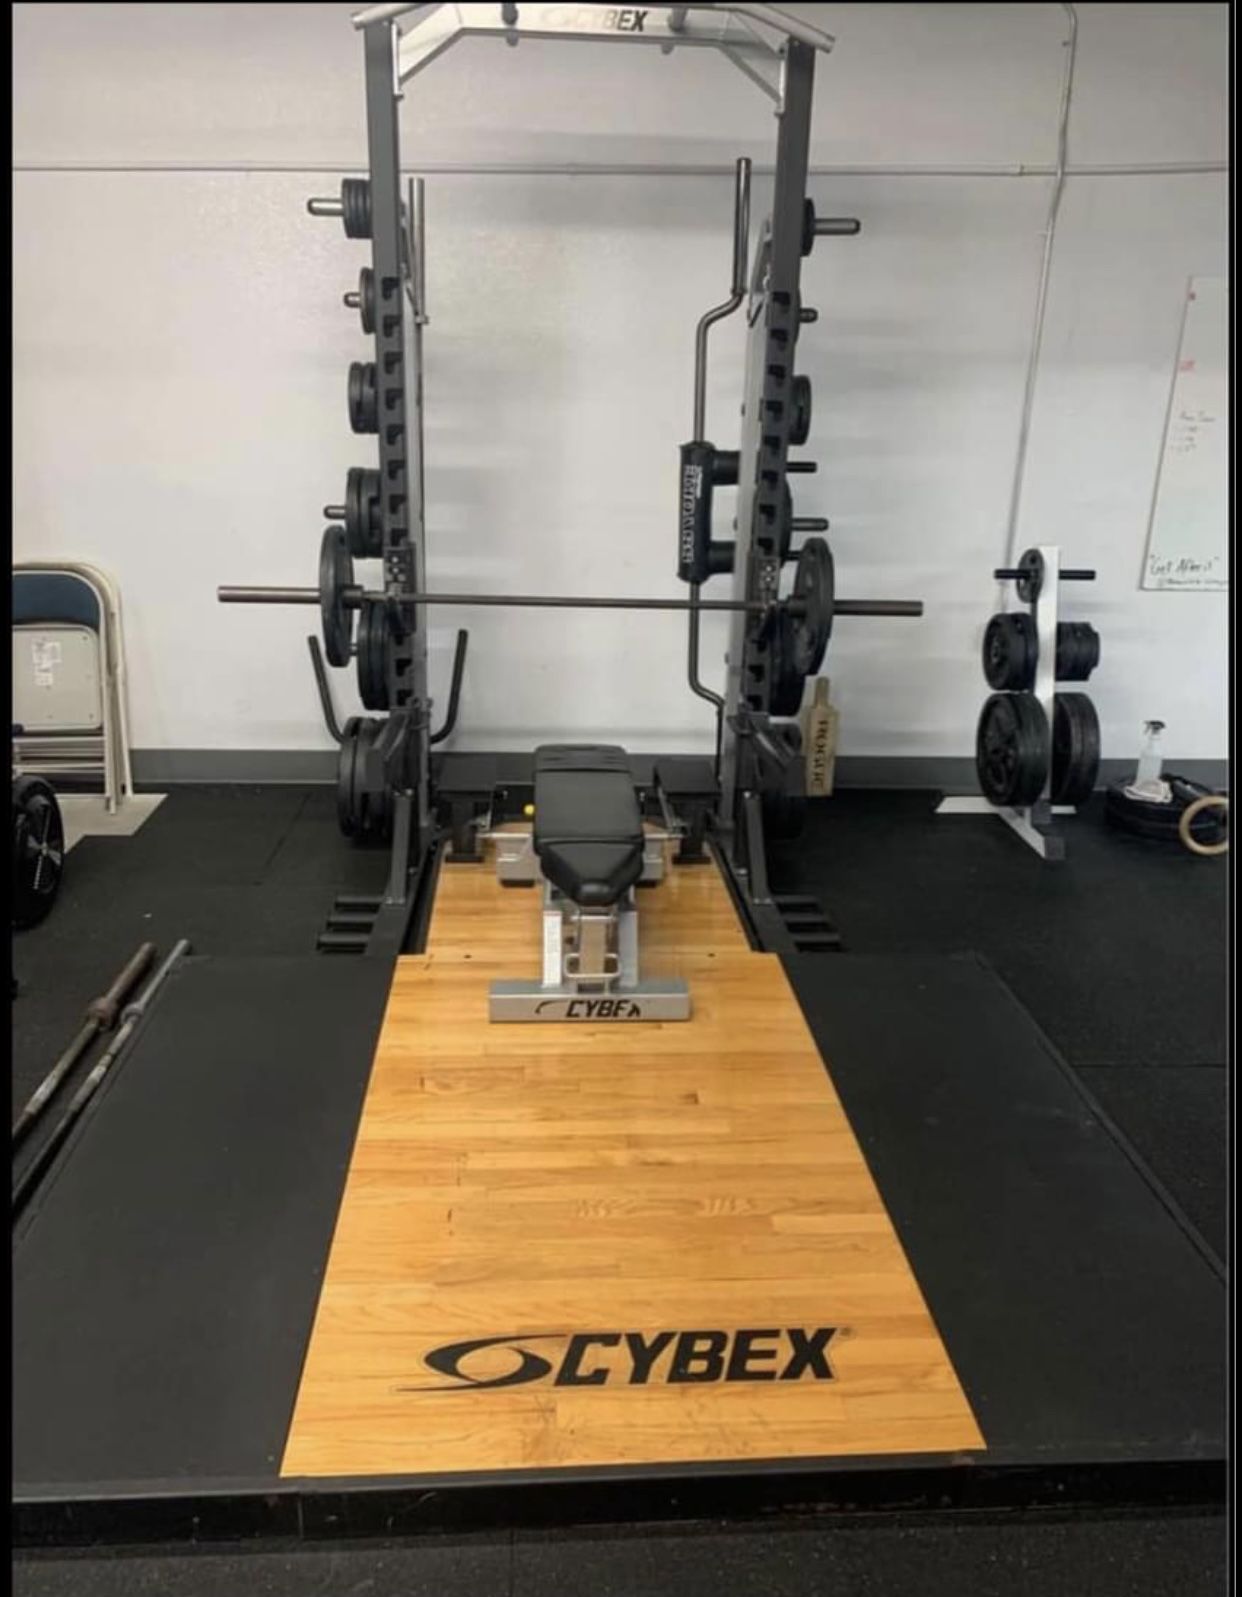 Like New Cybex Olympic Commercial Squat Rack With Platform, Bench & Dip Attachment